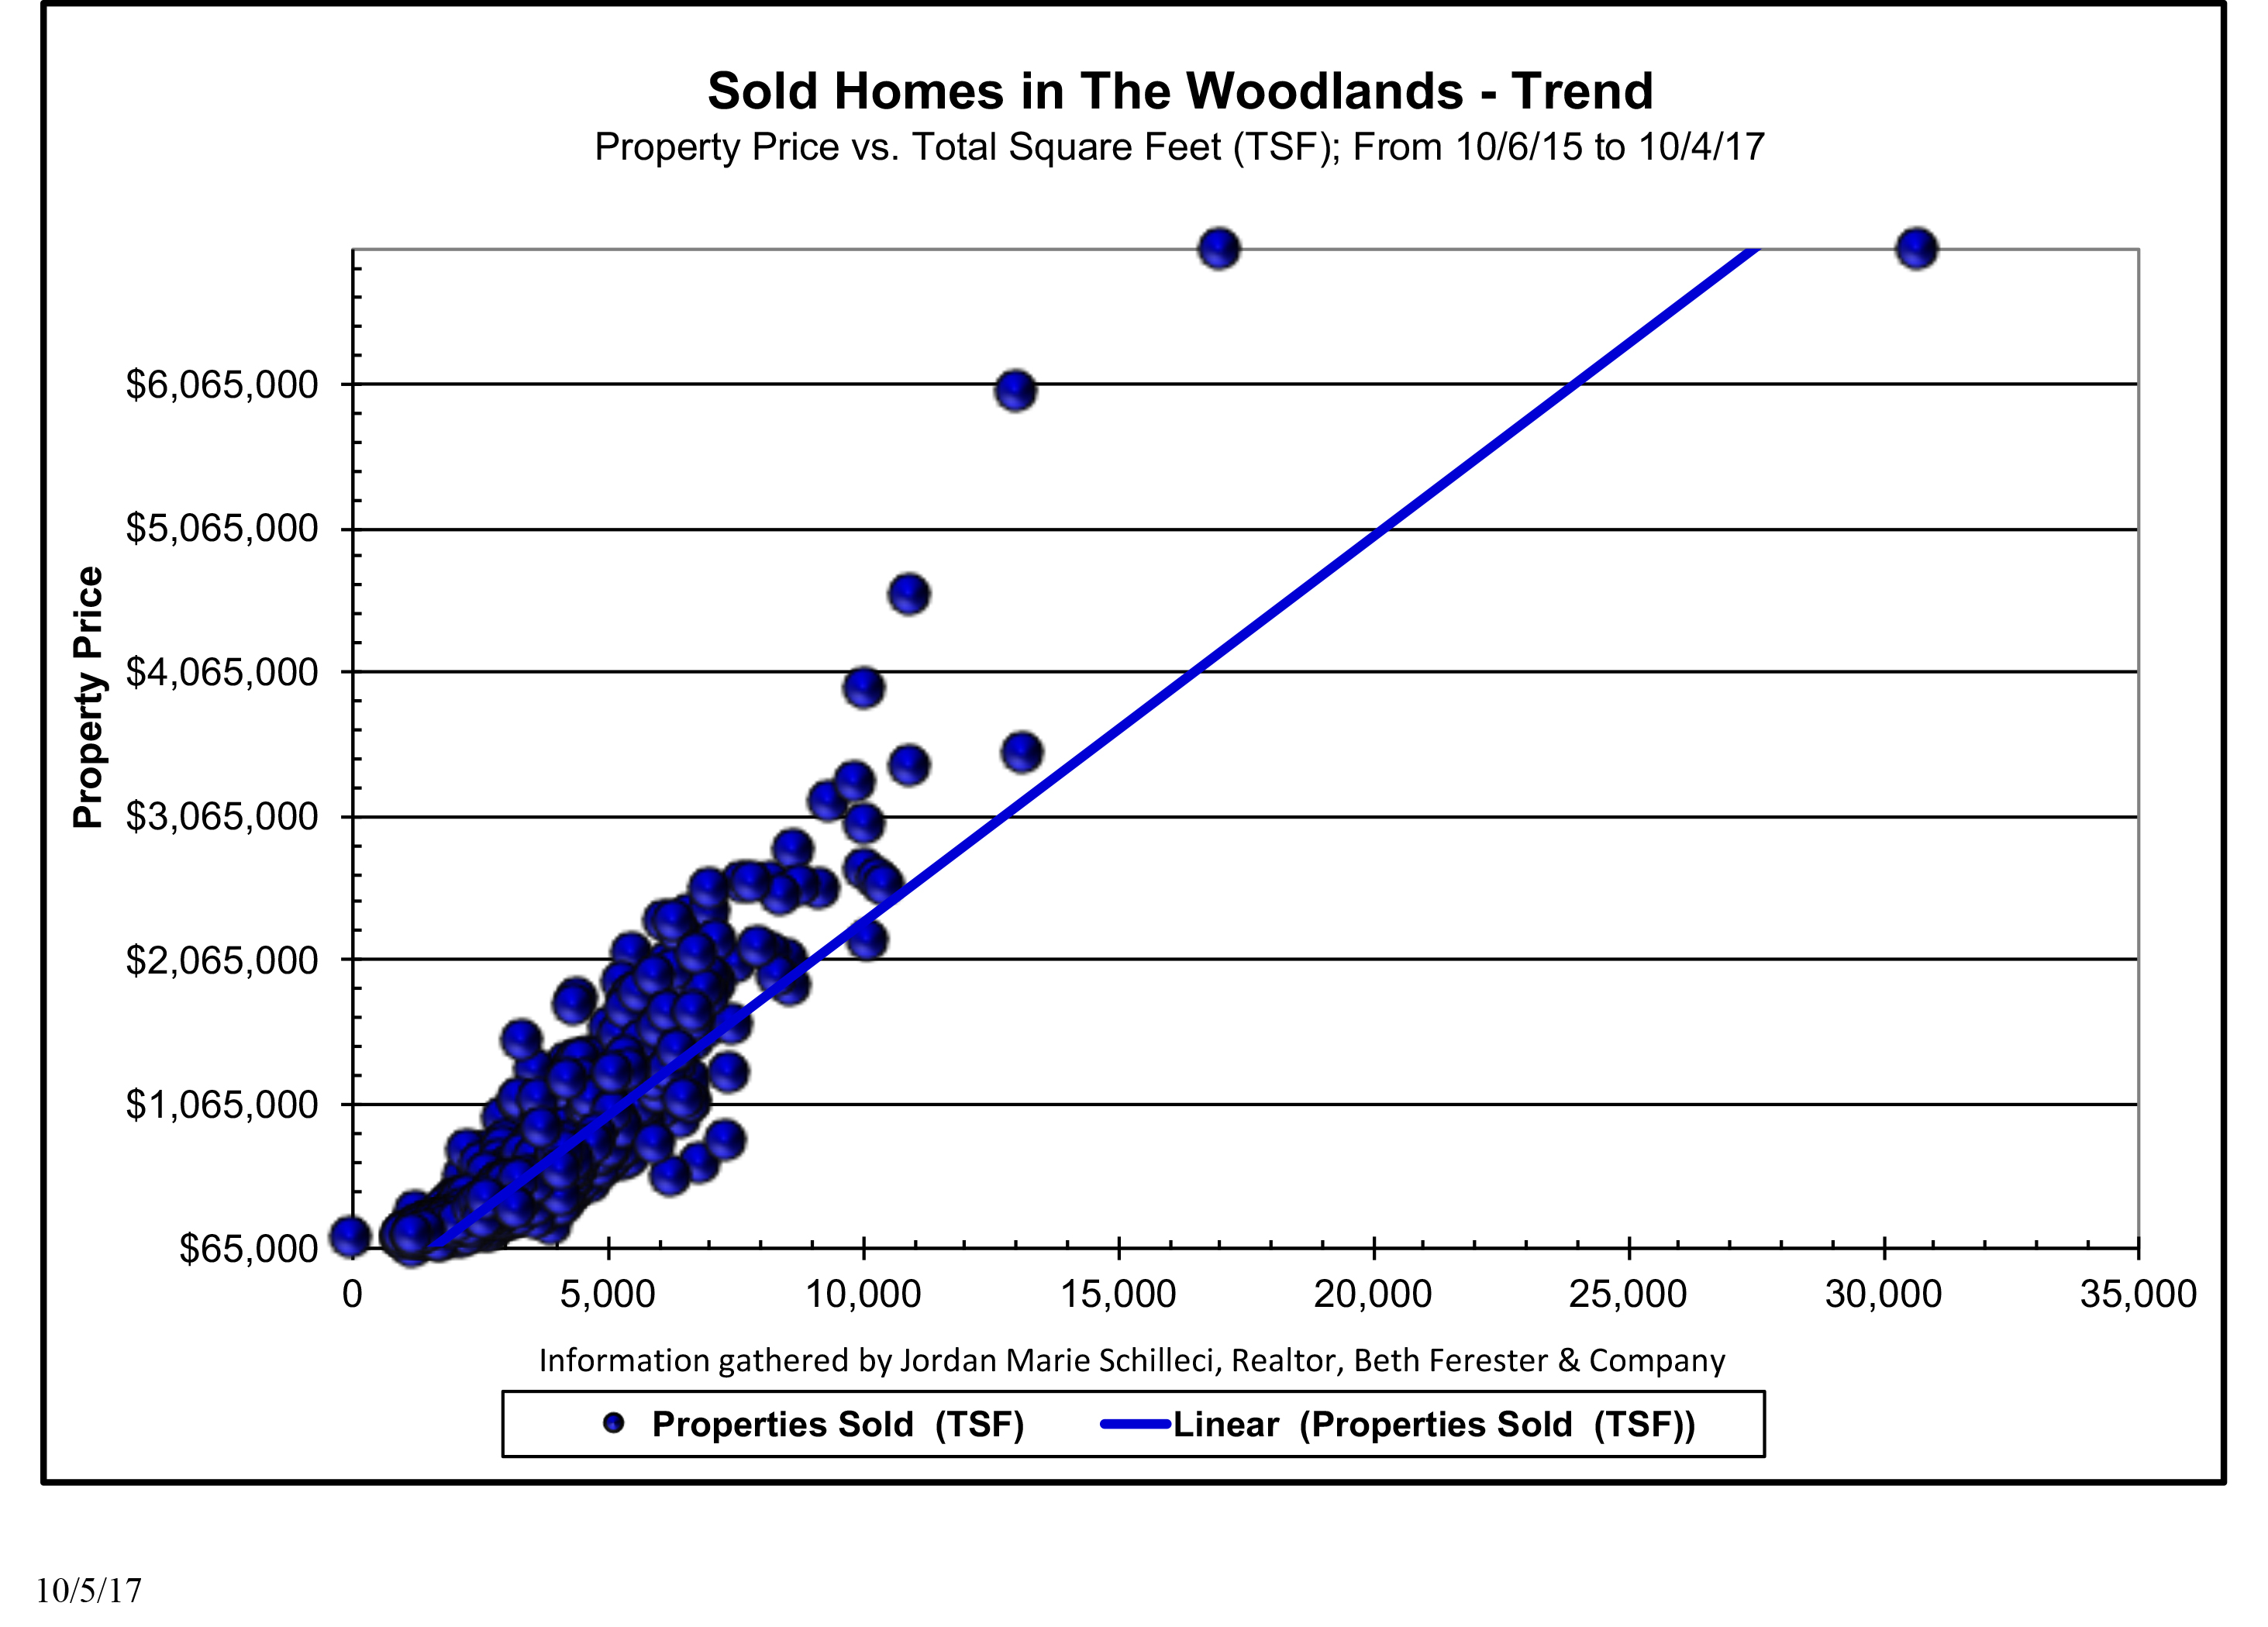 New Home Sales The Woodlands